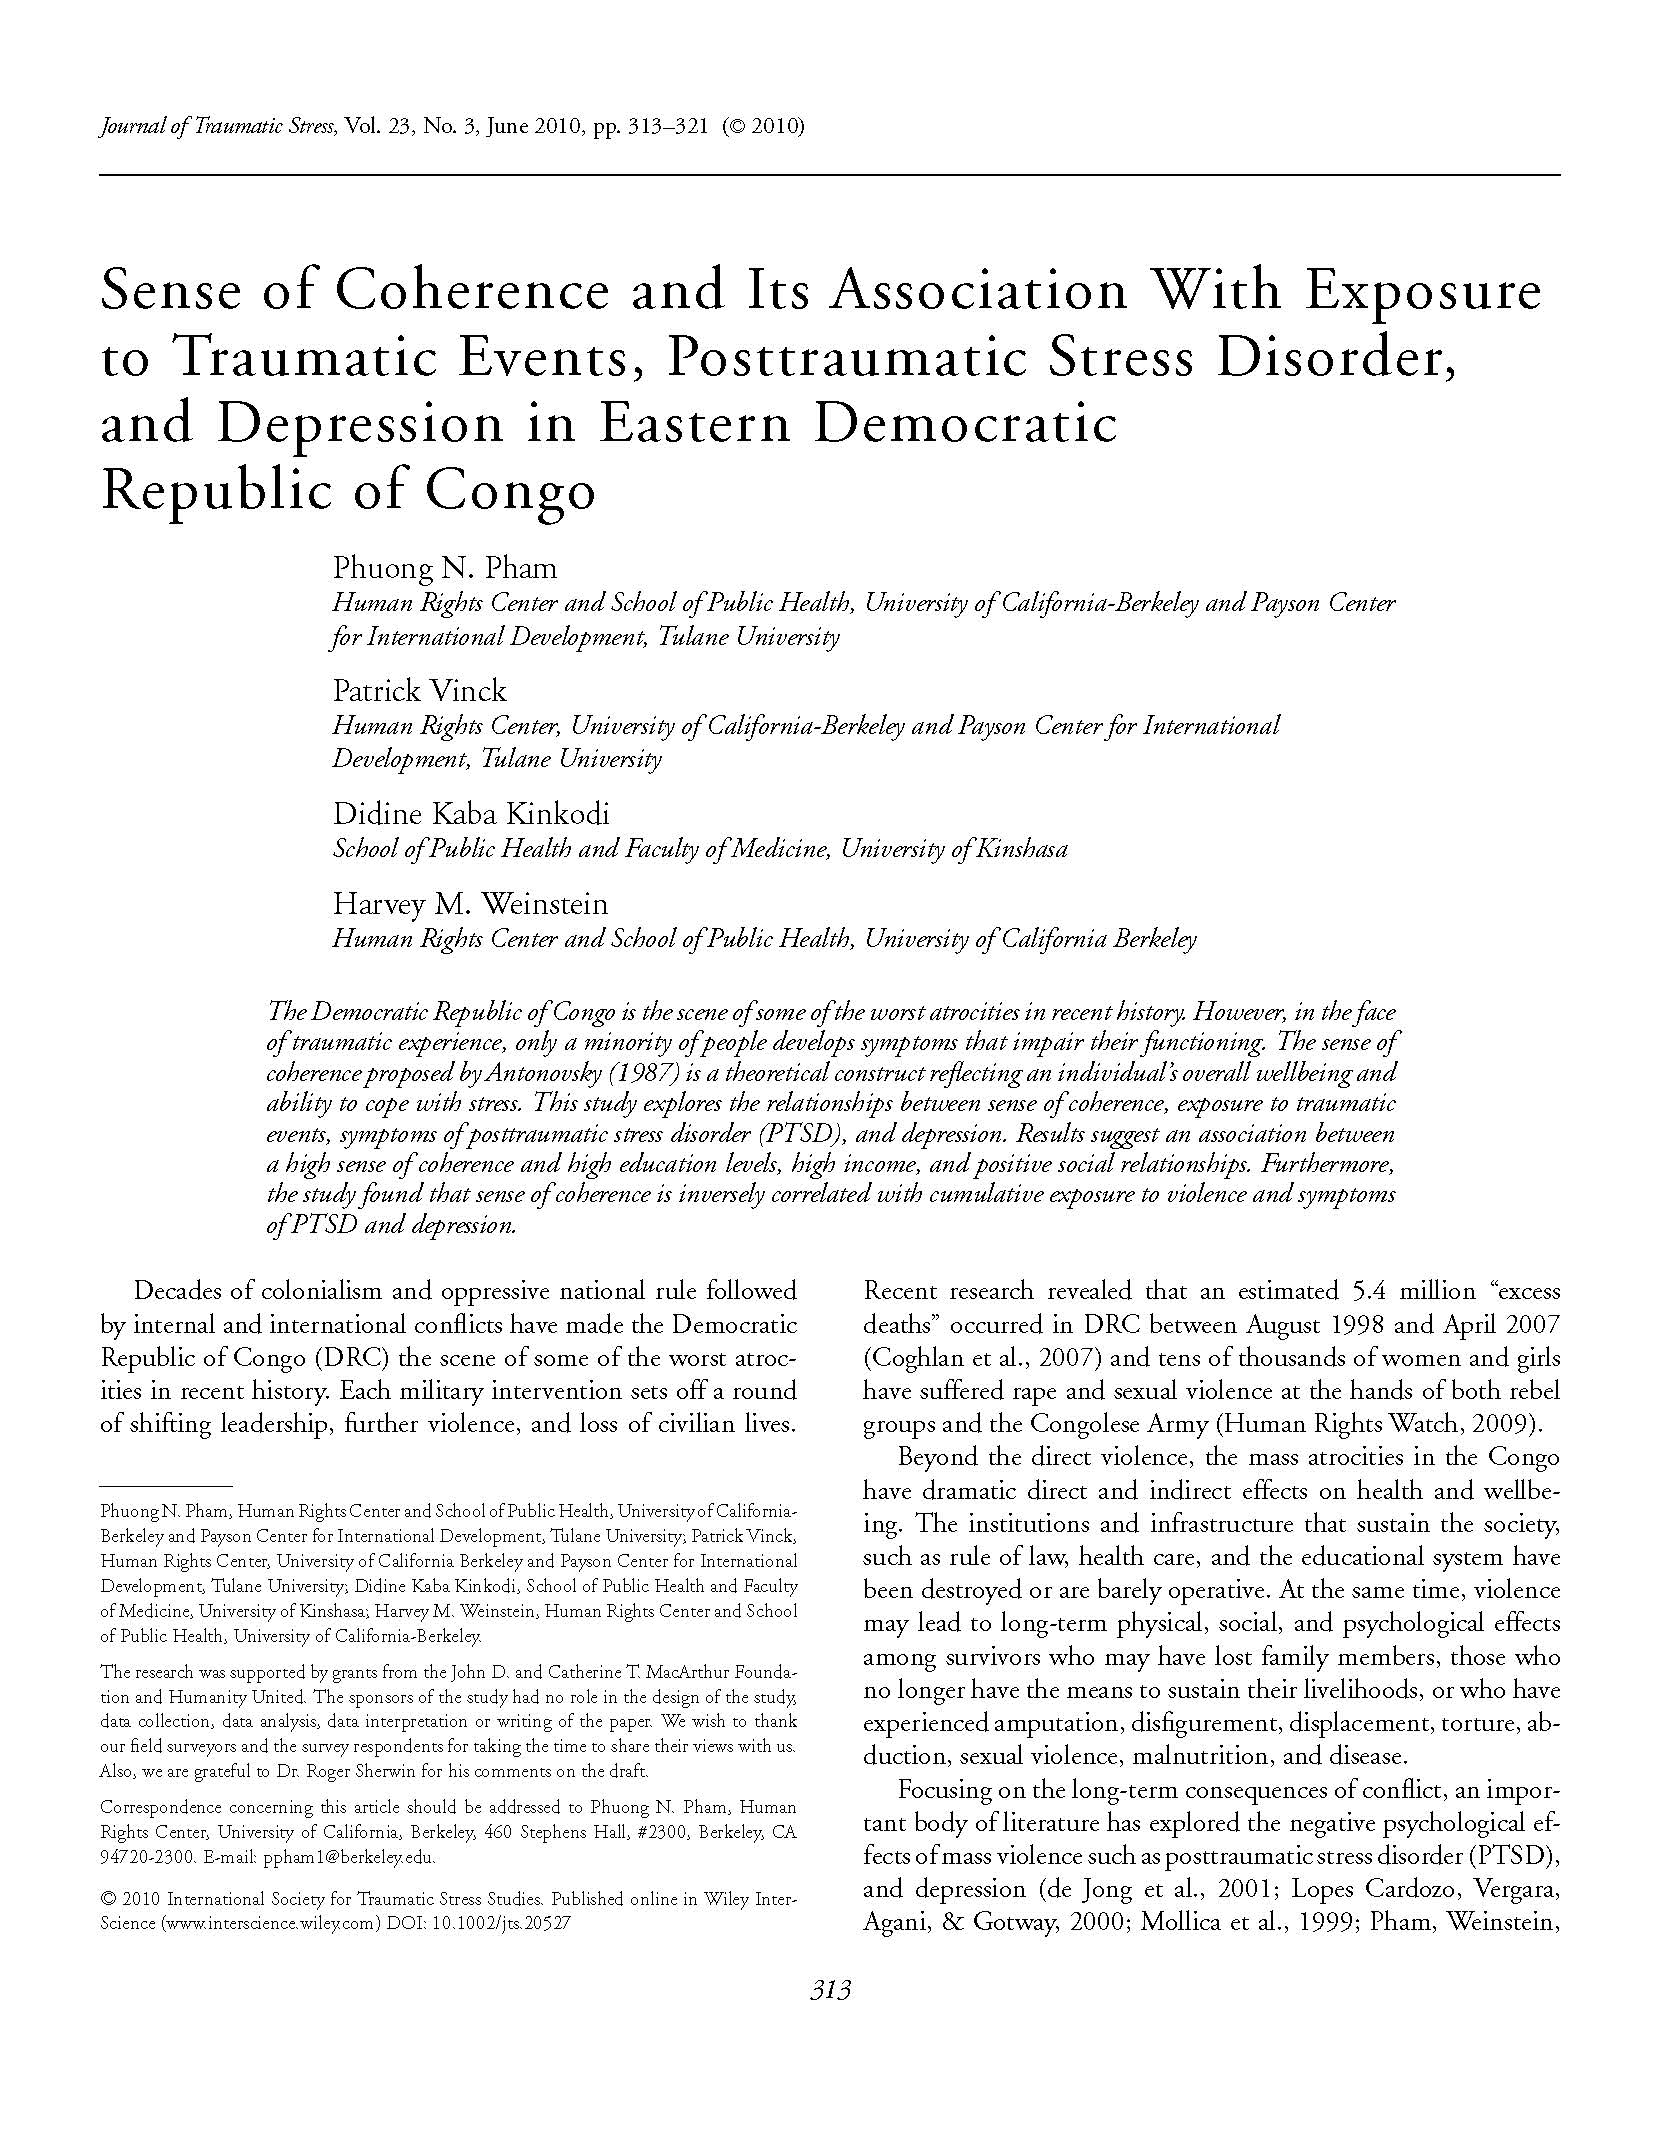 Pages from Sense of coherence and its association with exposure to traumatic events, posttraumatic stress disorder, and depression in eastern Democratic Republic of Congo